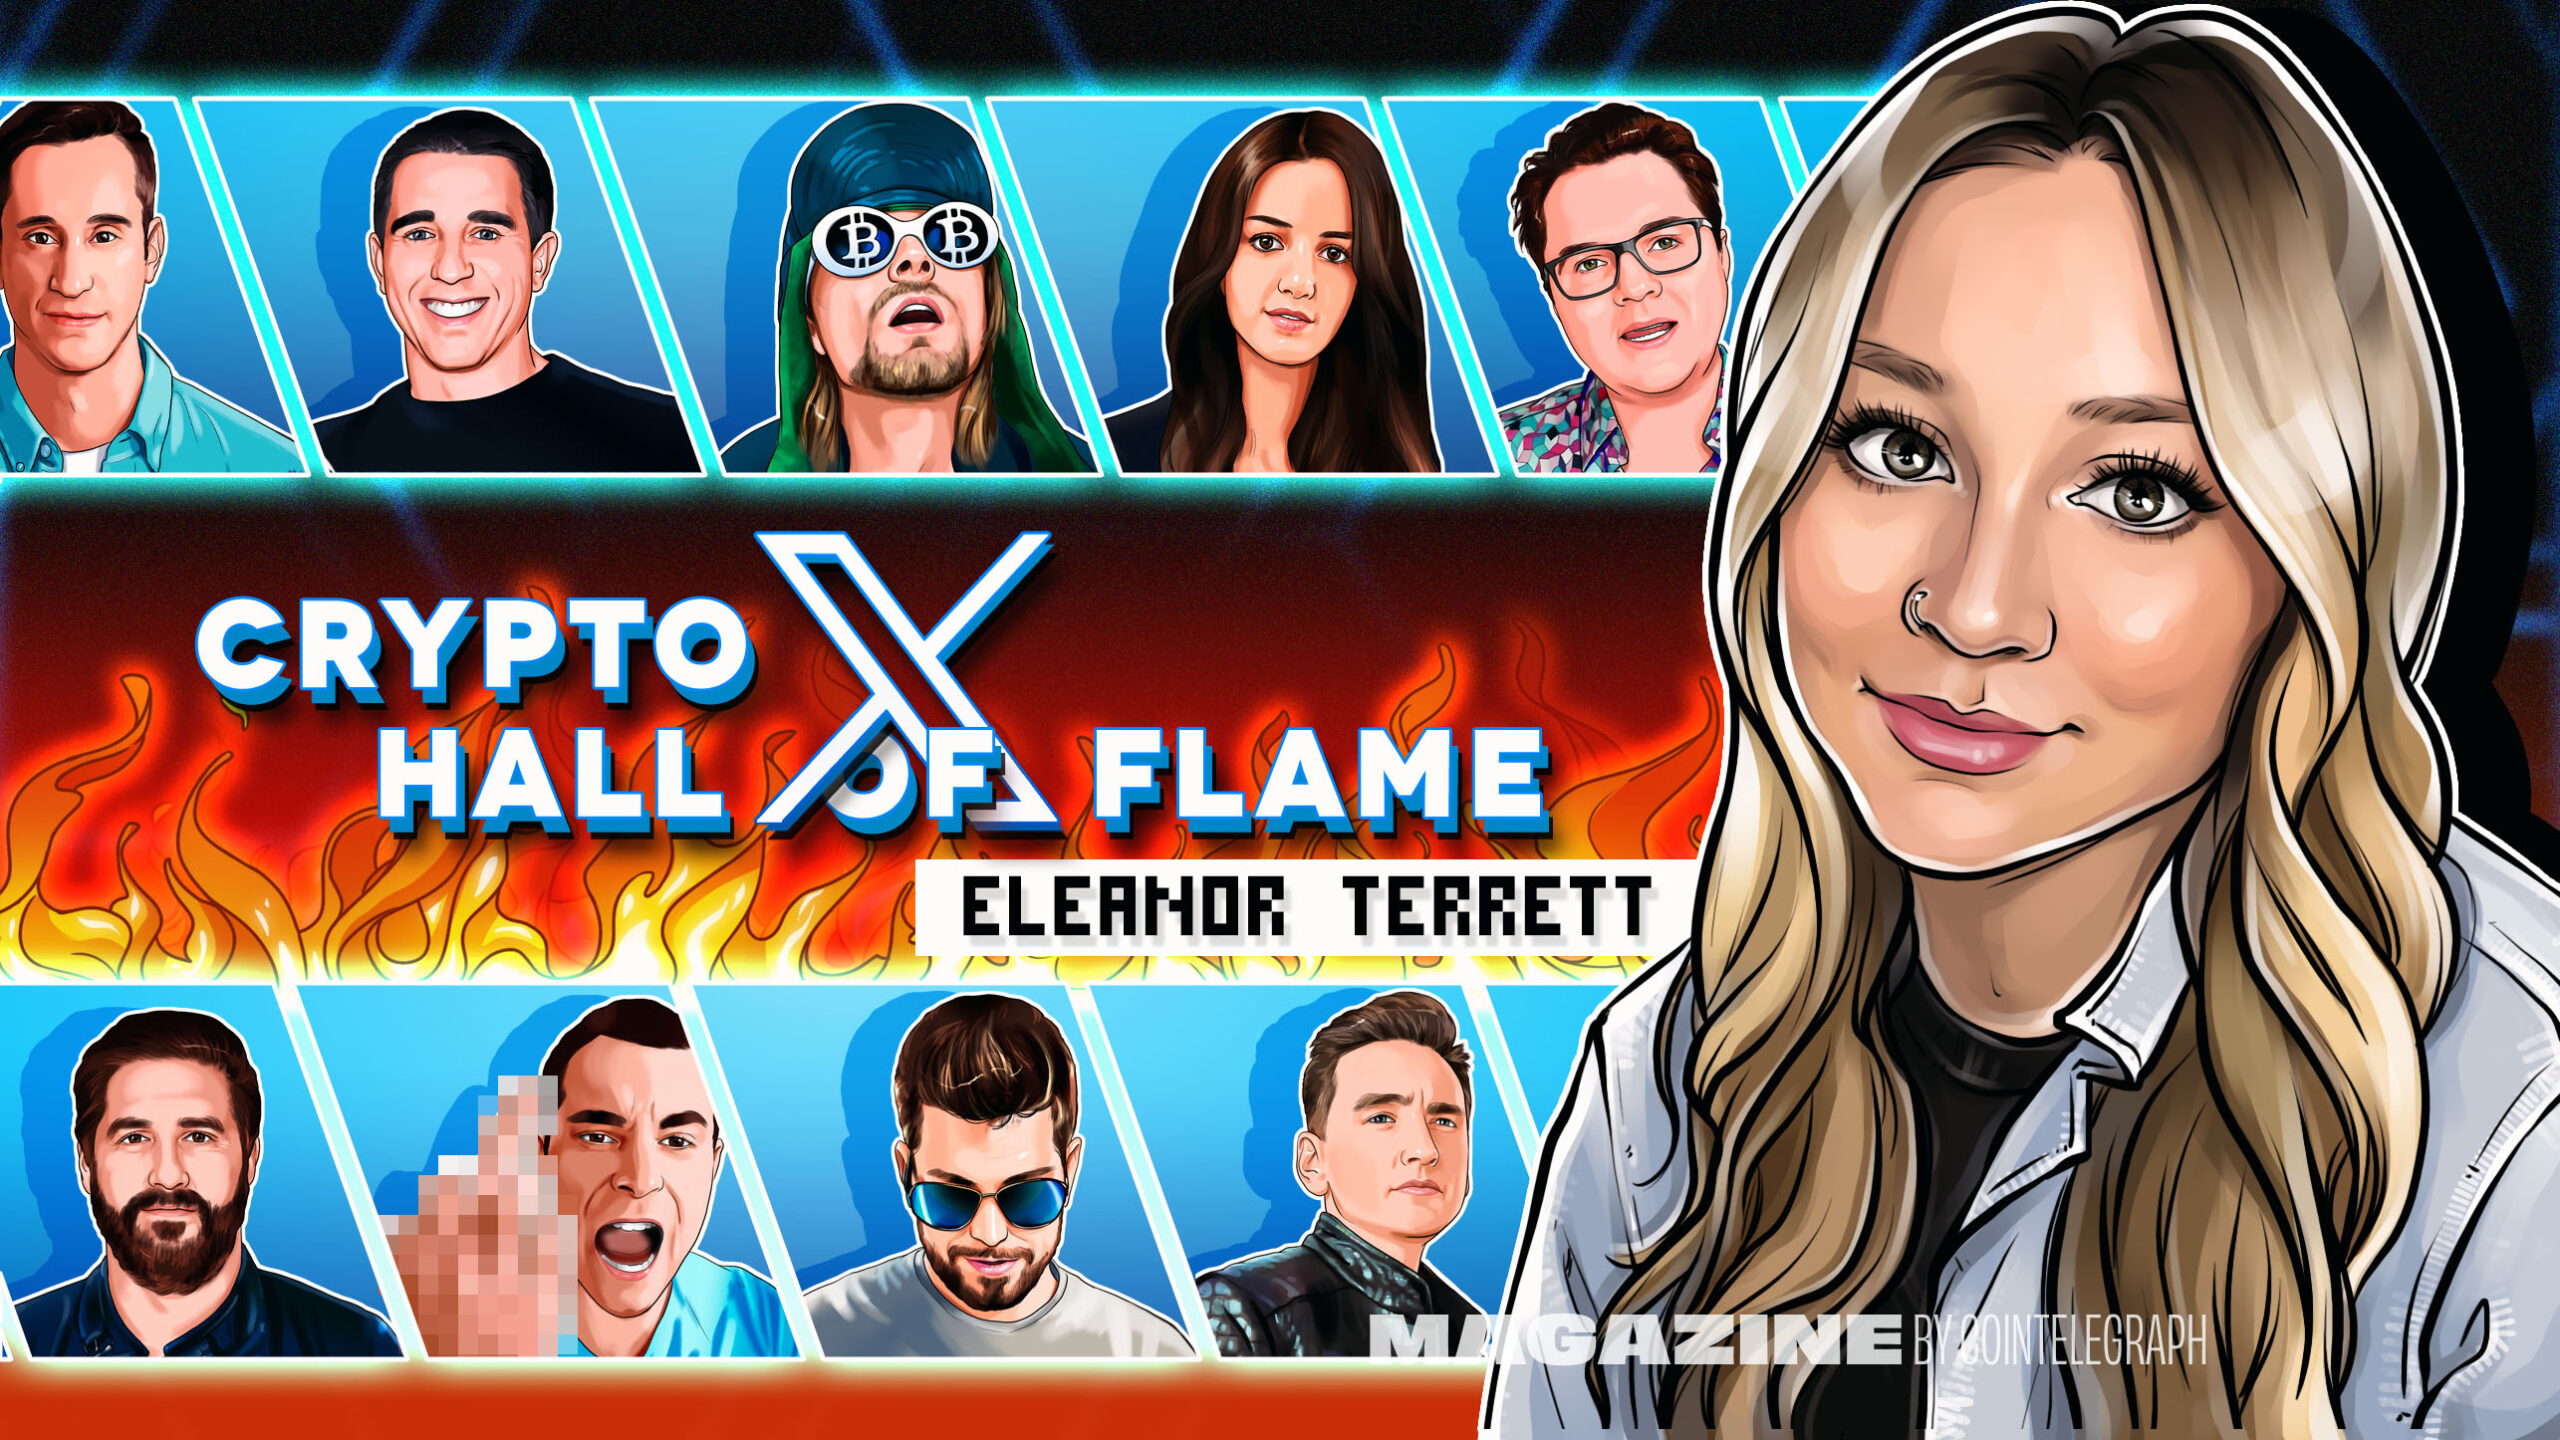 Eleanor-terrett-on-impersonators-and-a-better-crypto-industry:-hall-of-flame